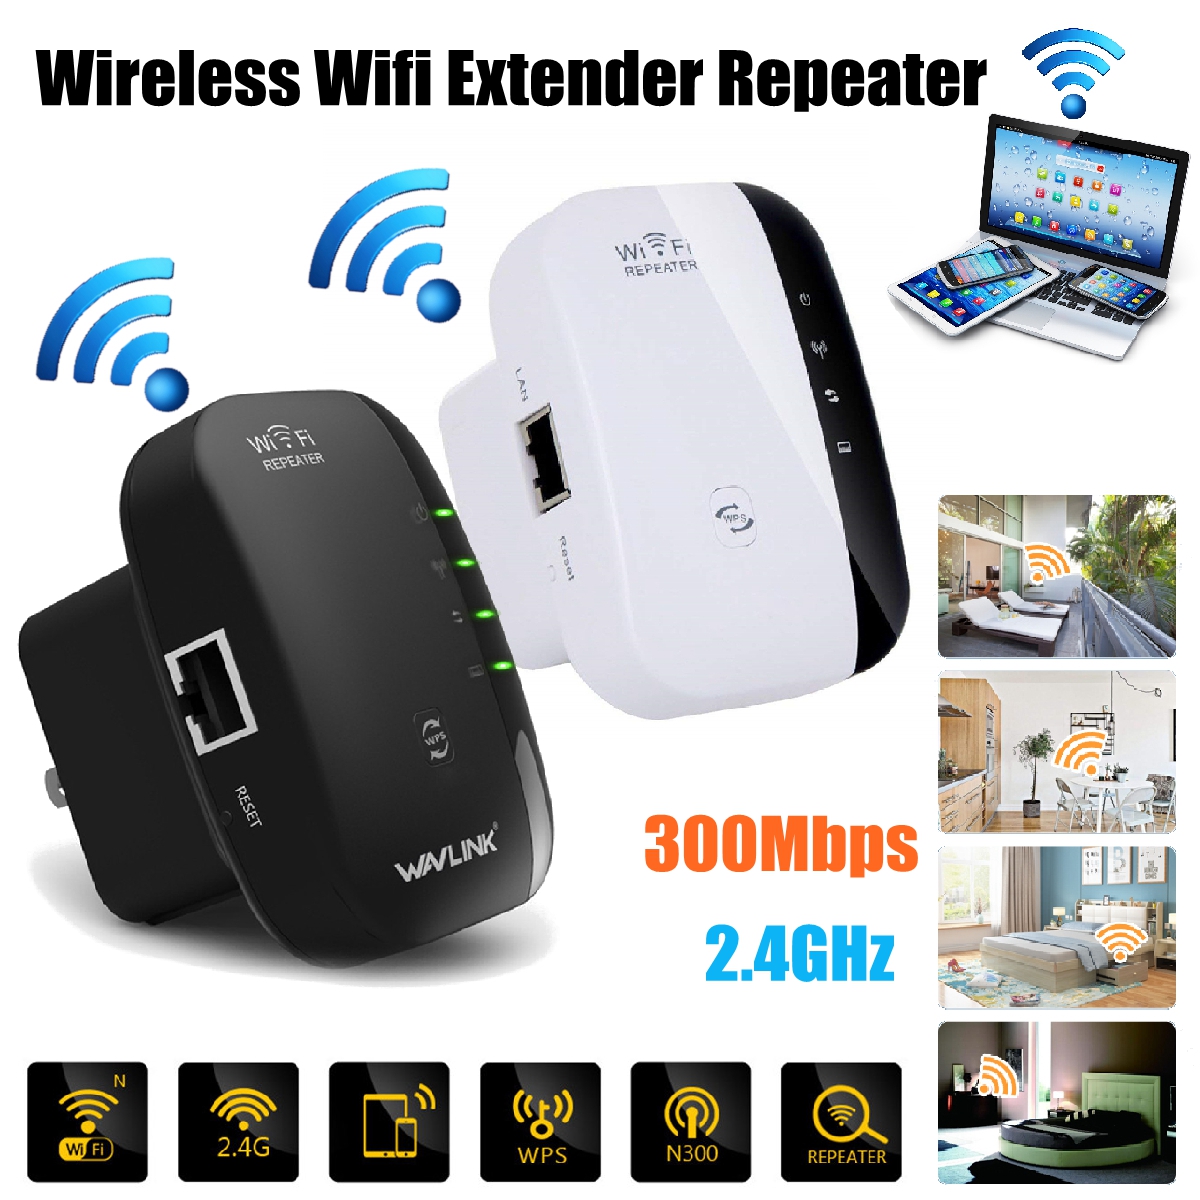 Ge01-Wireless-network-signal-repeater-wifi-small-amplifier-router-head-expander-300M-enhanced-transm-1553783-1